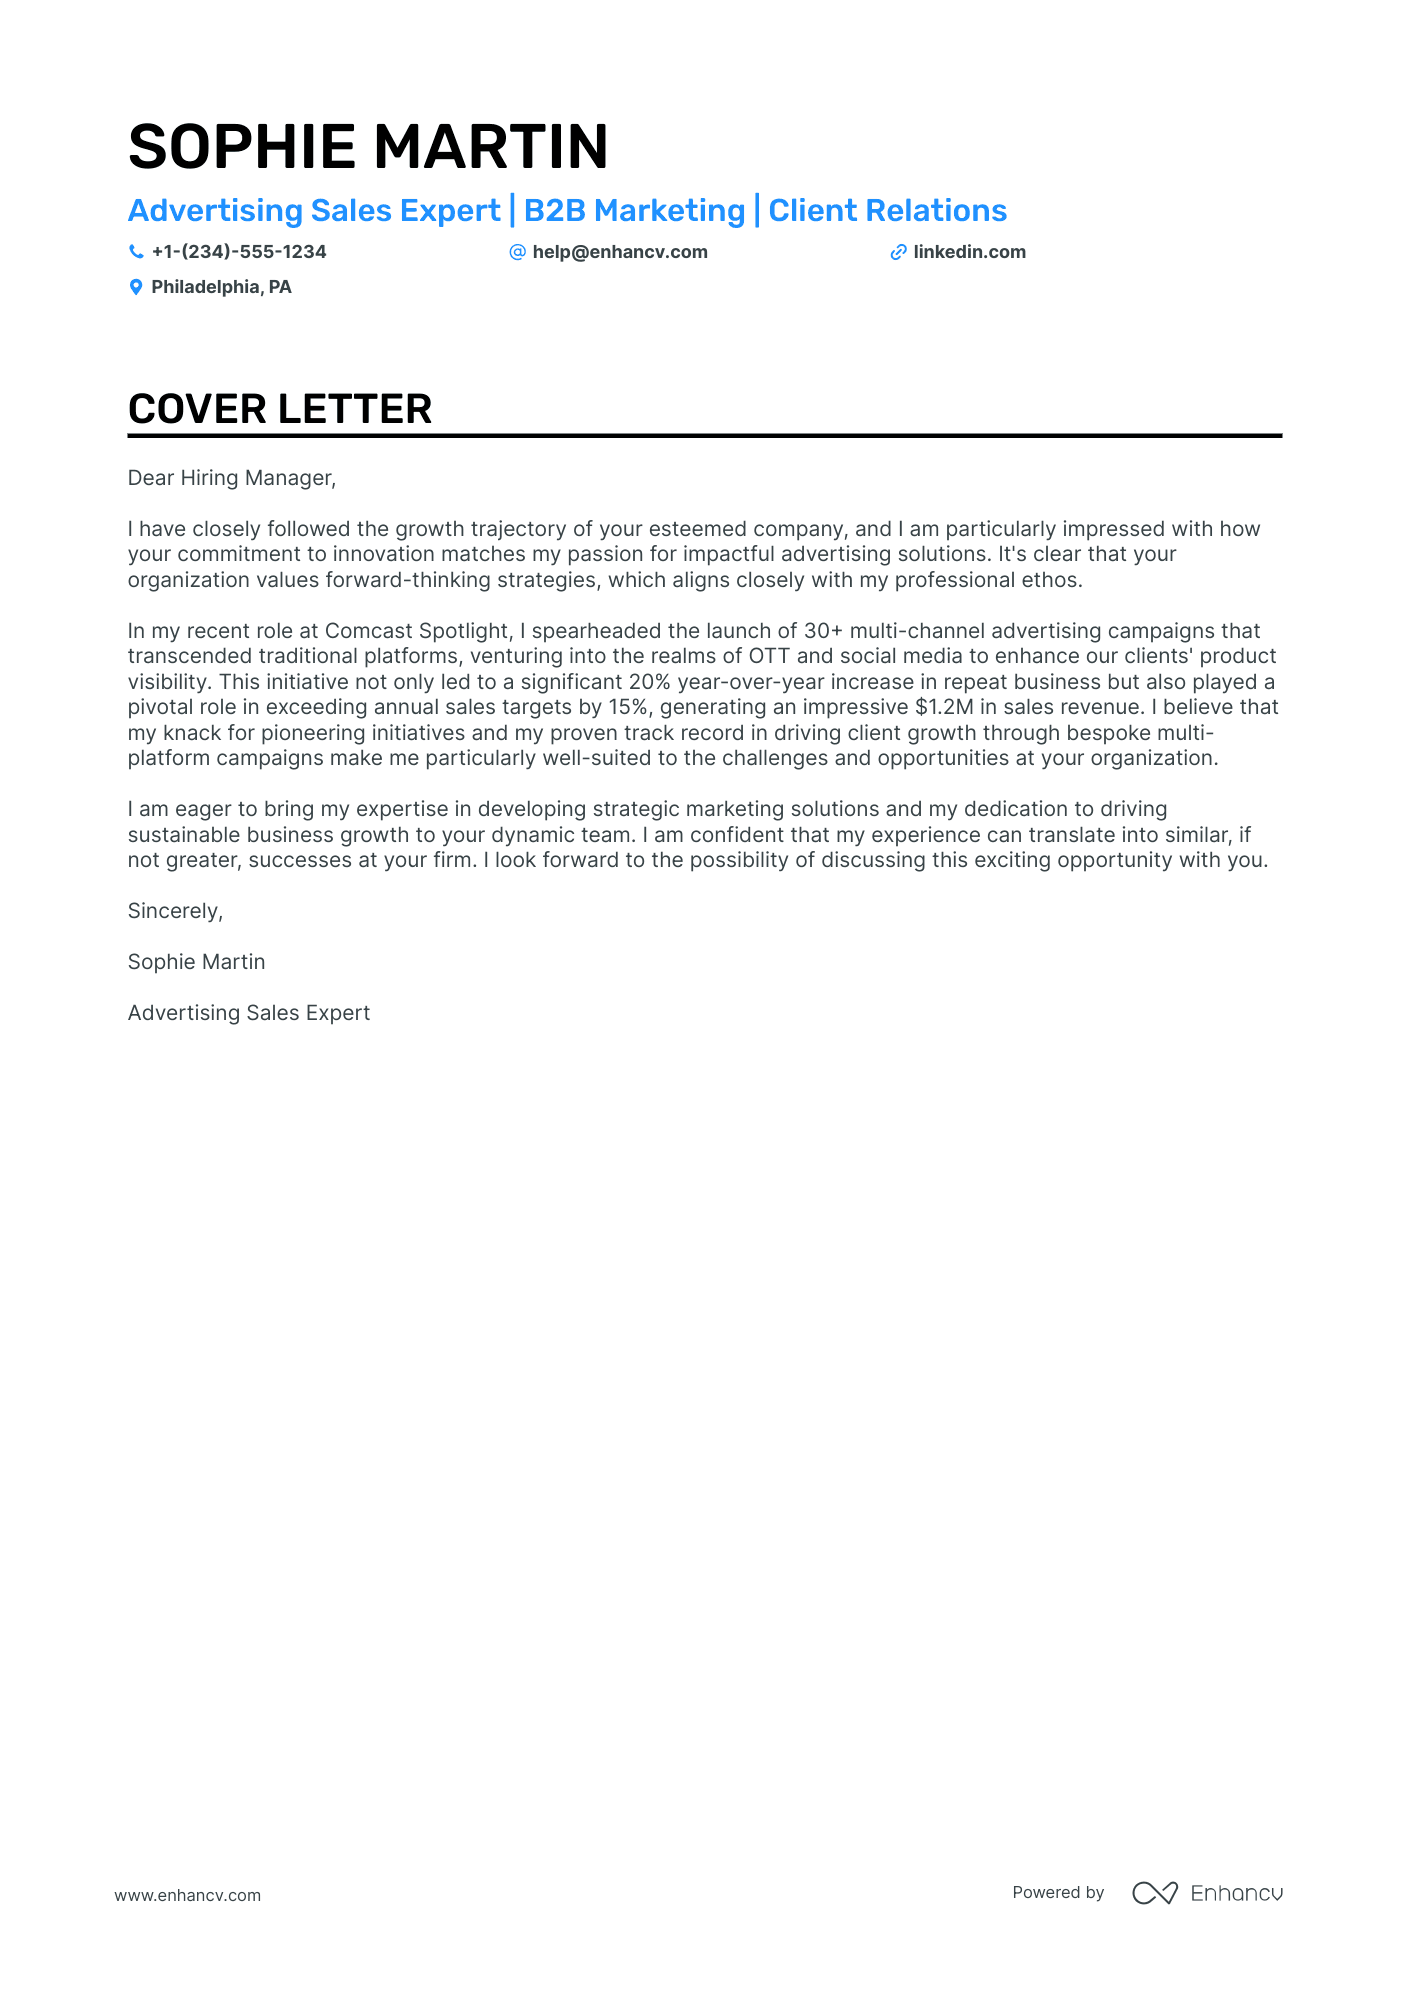 sample of sales executive cover letter